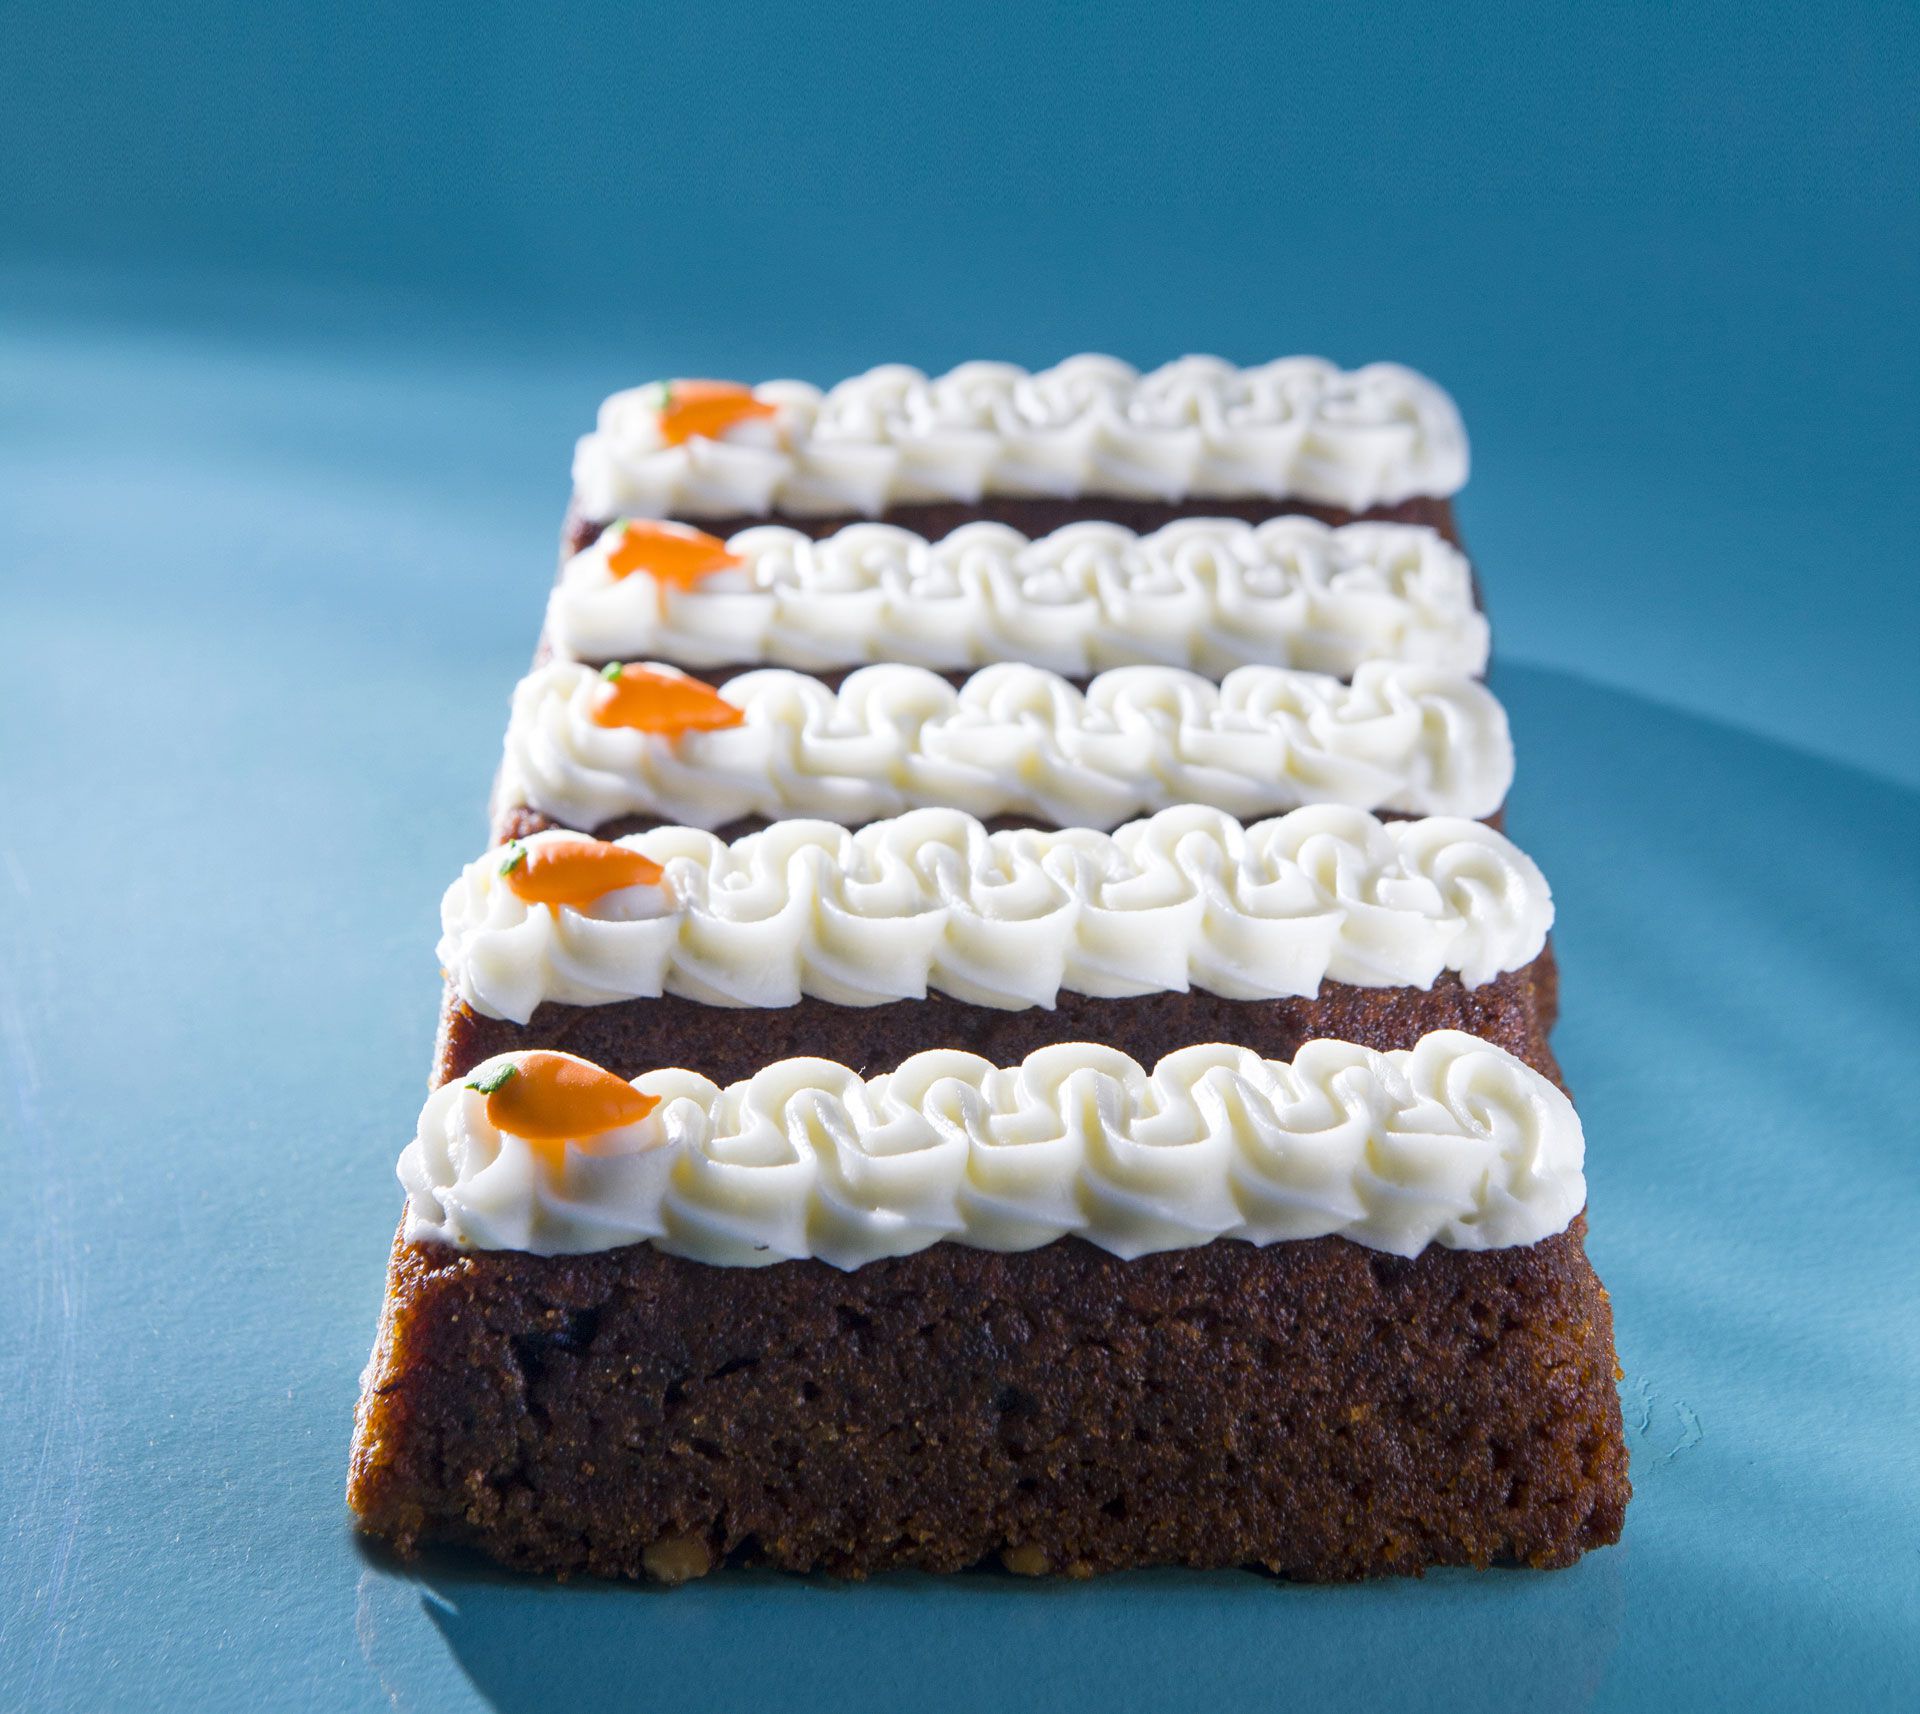 Mini carrot cake con frosting (Gout Gluten Free)